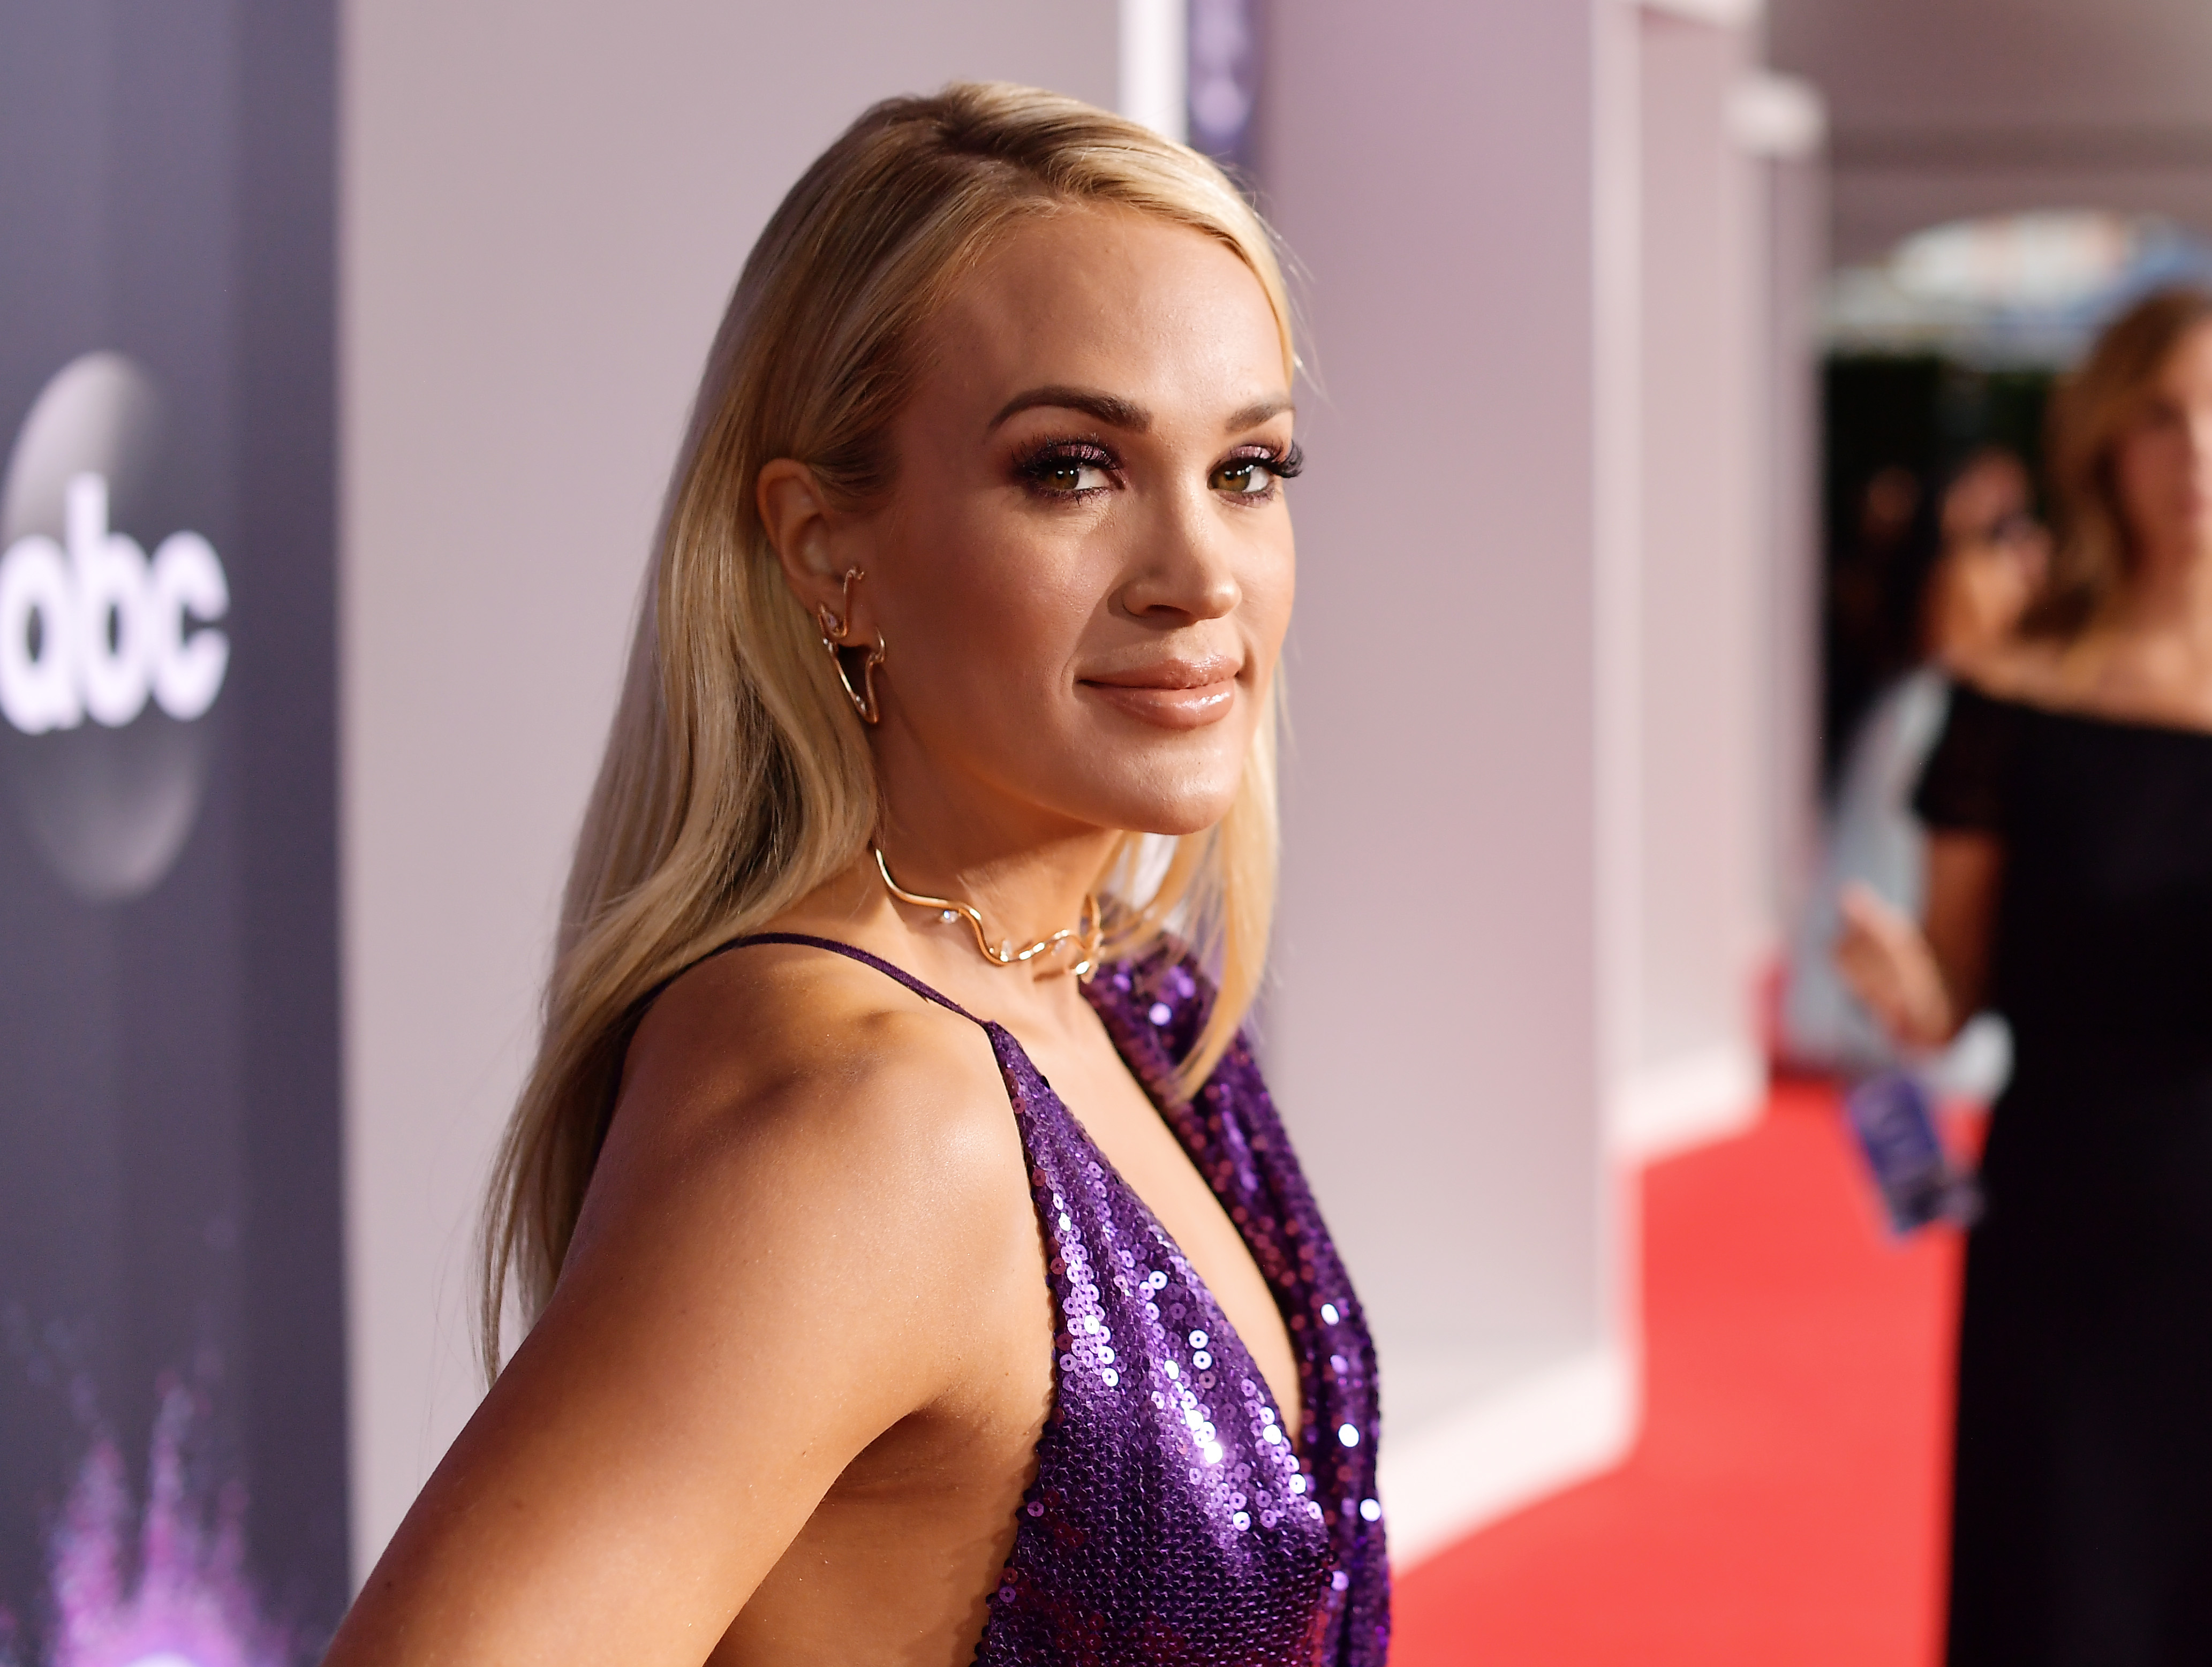 Carrie Underwood poses in a purple dress